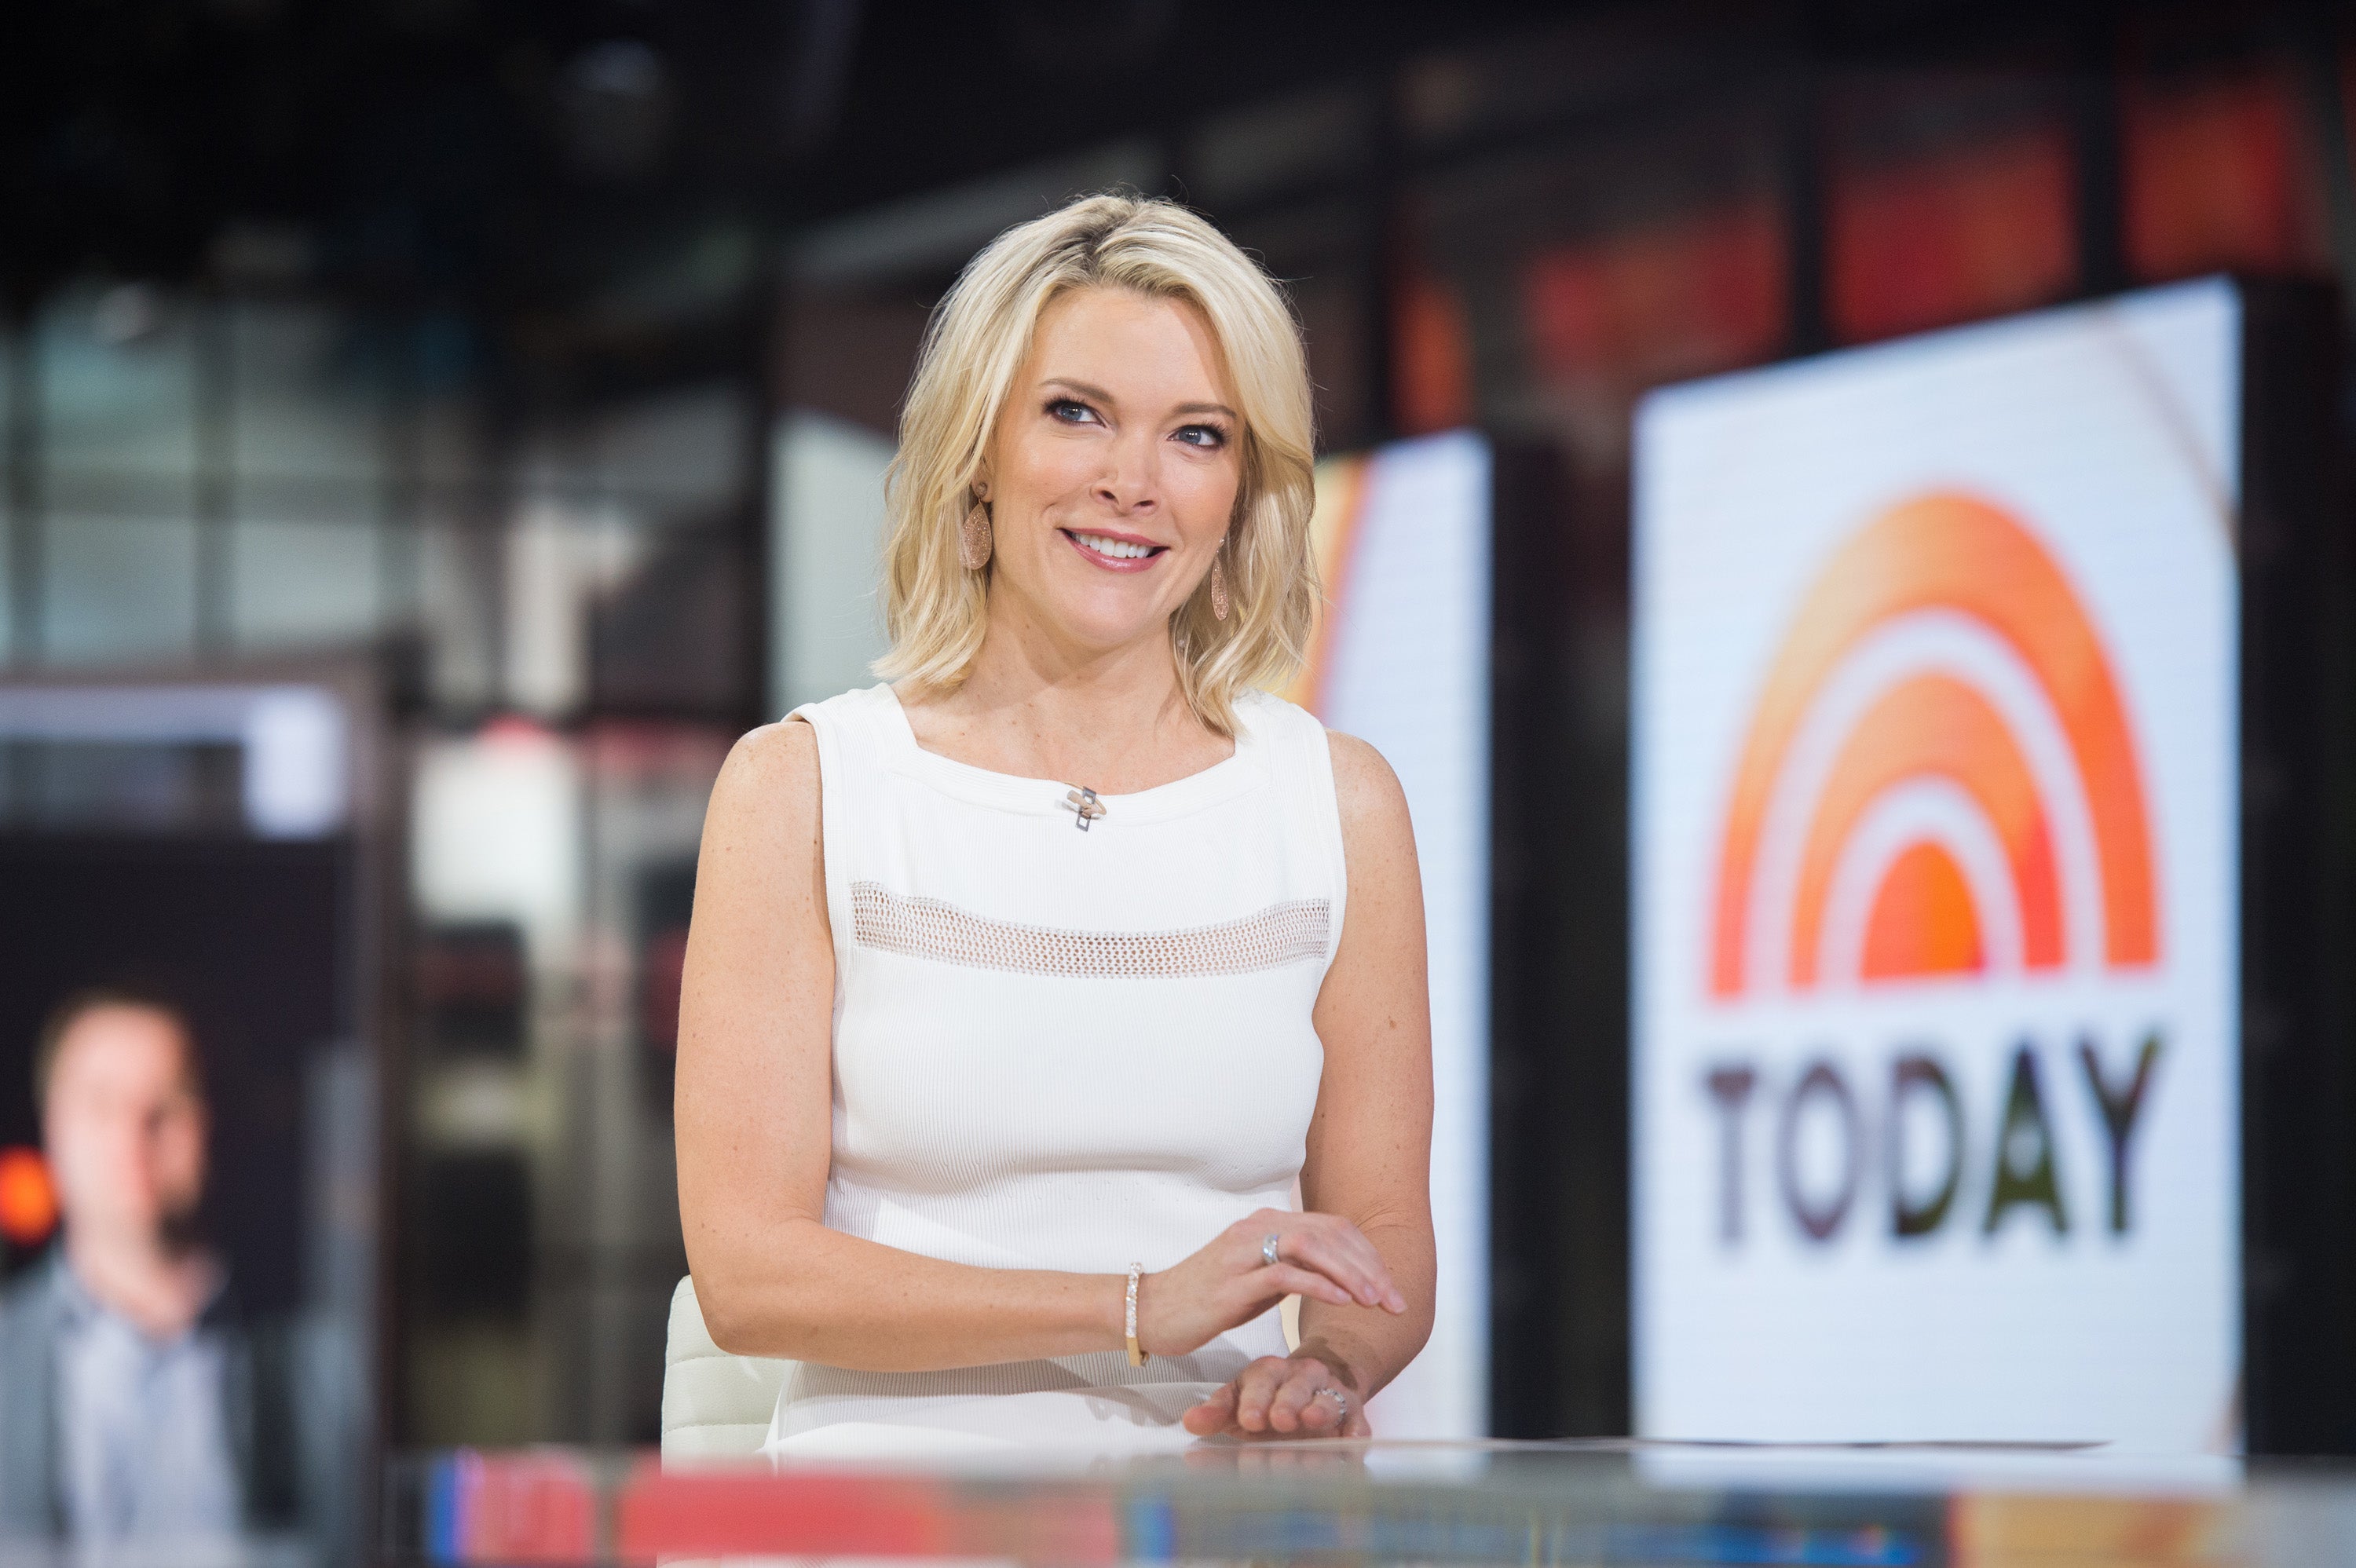 NBC Execs Have Reason To Panic About Megyn Kelly's Morning Show
